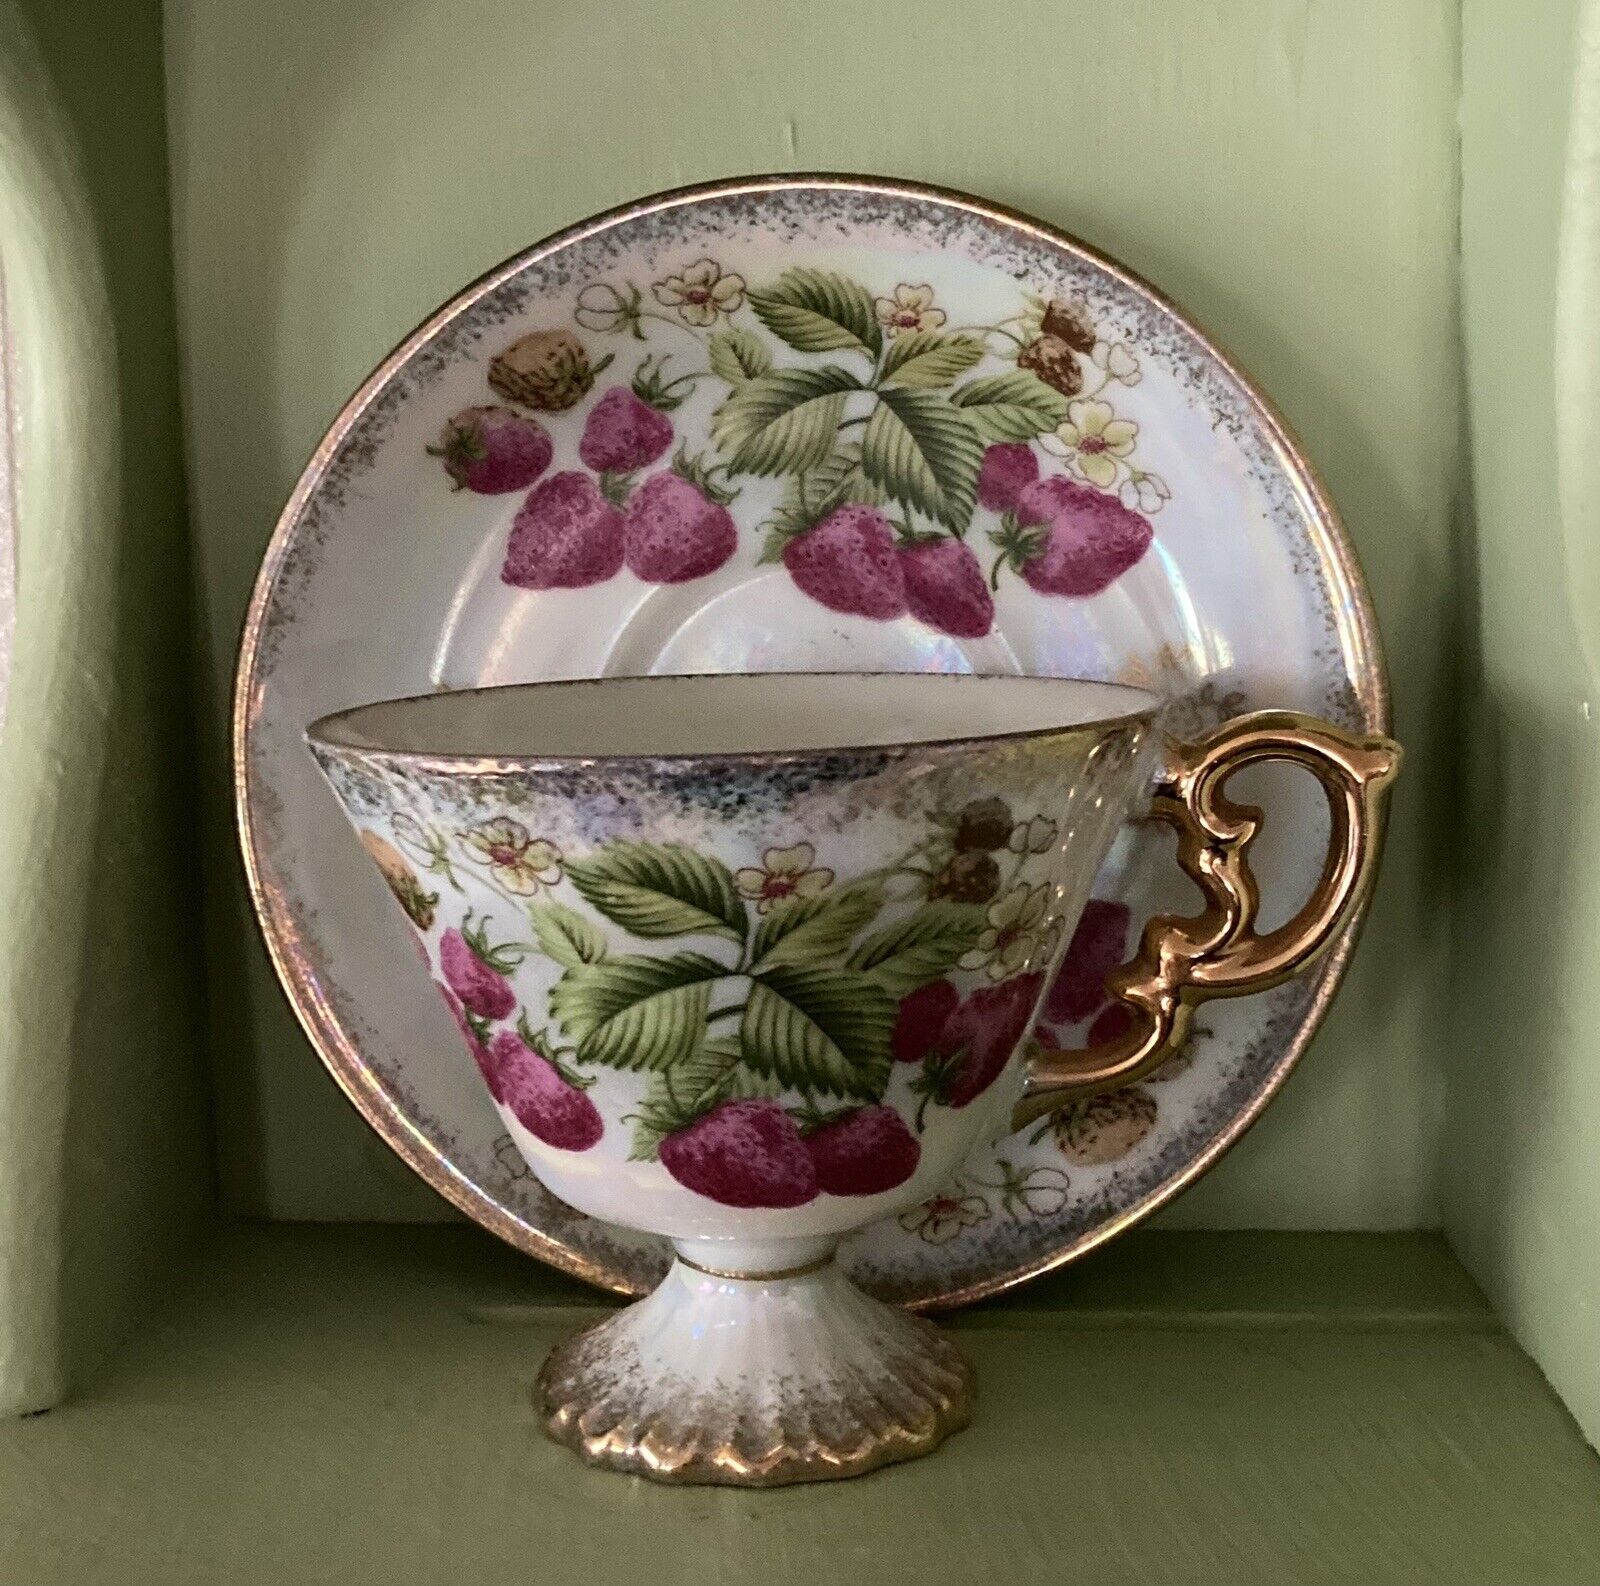 Iridescent Strawberry Teacup and Saucer by Wales Made in Japan